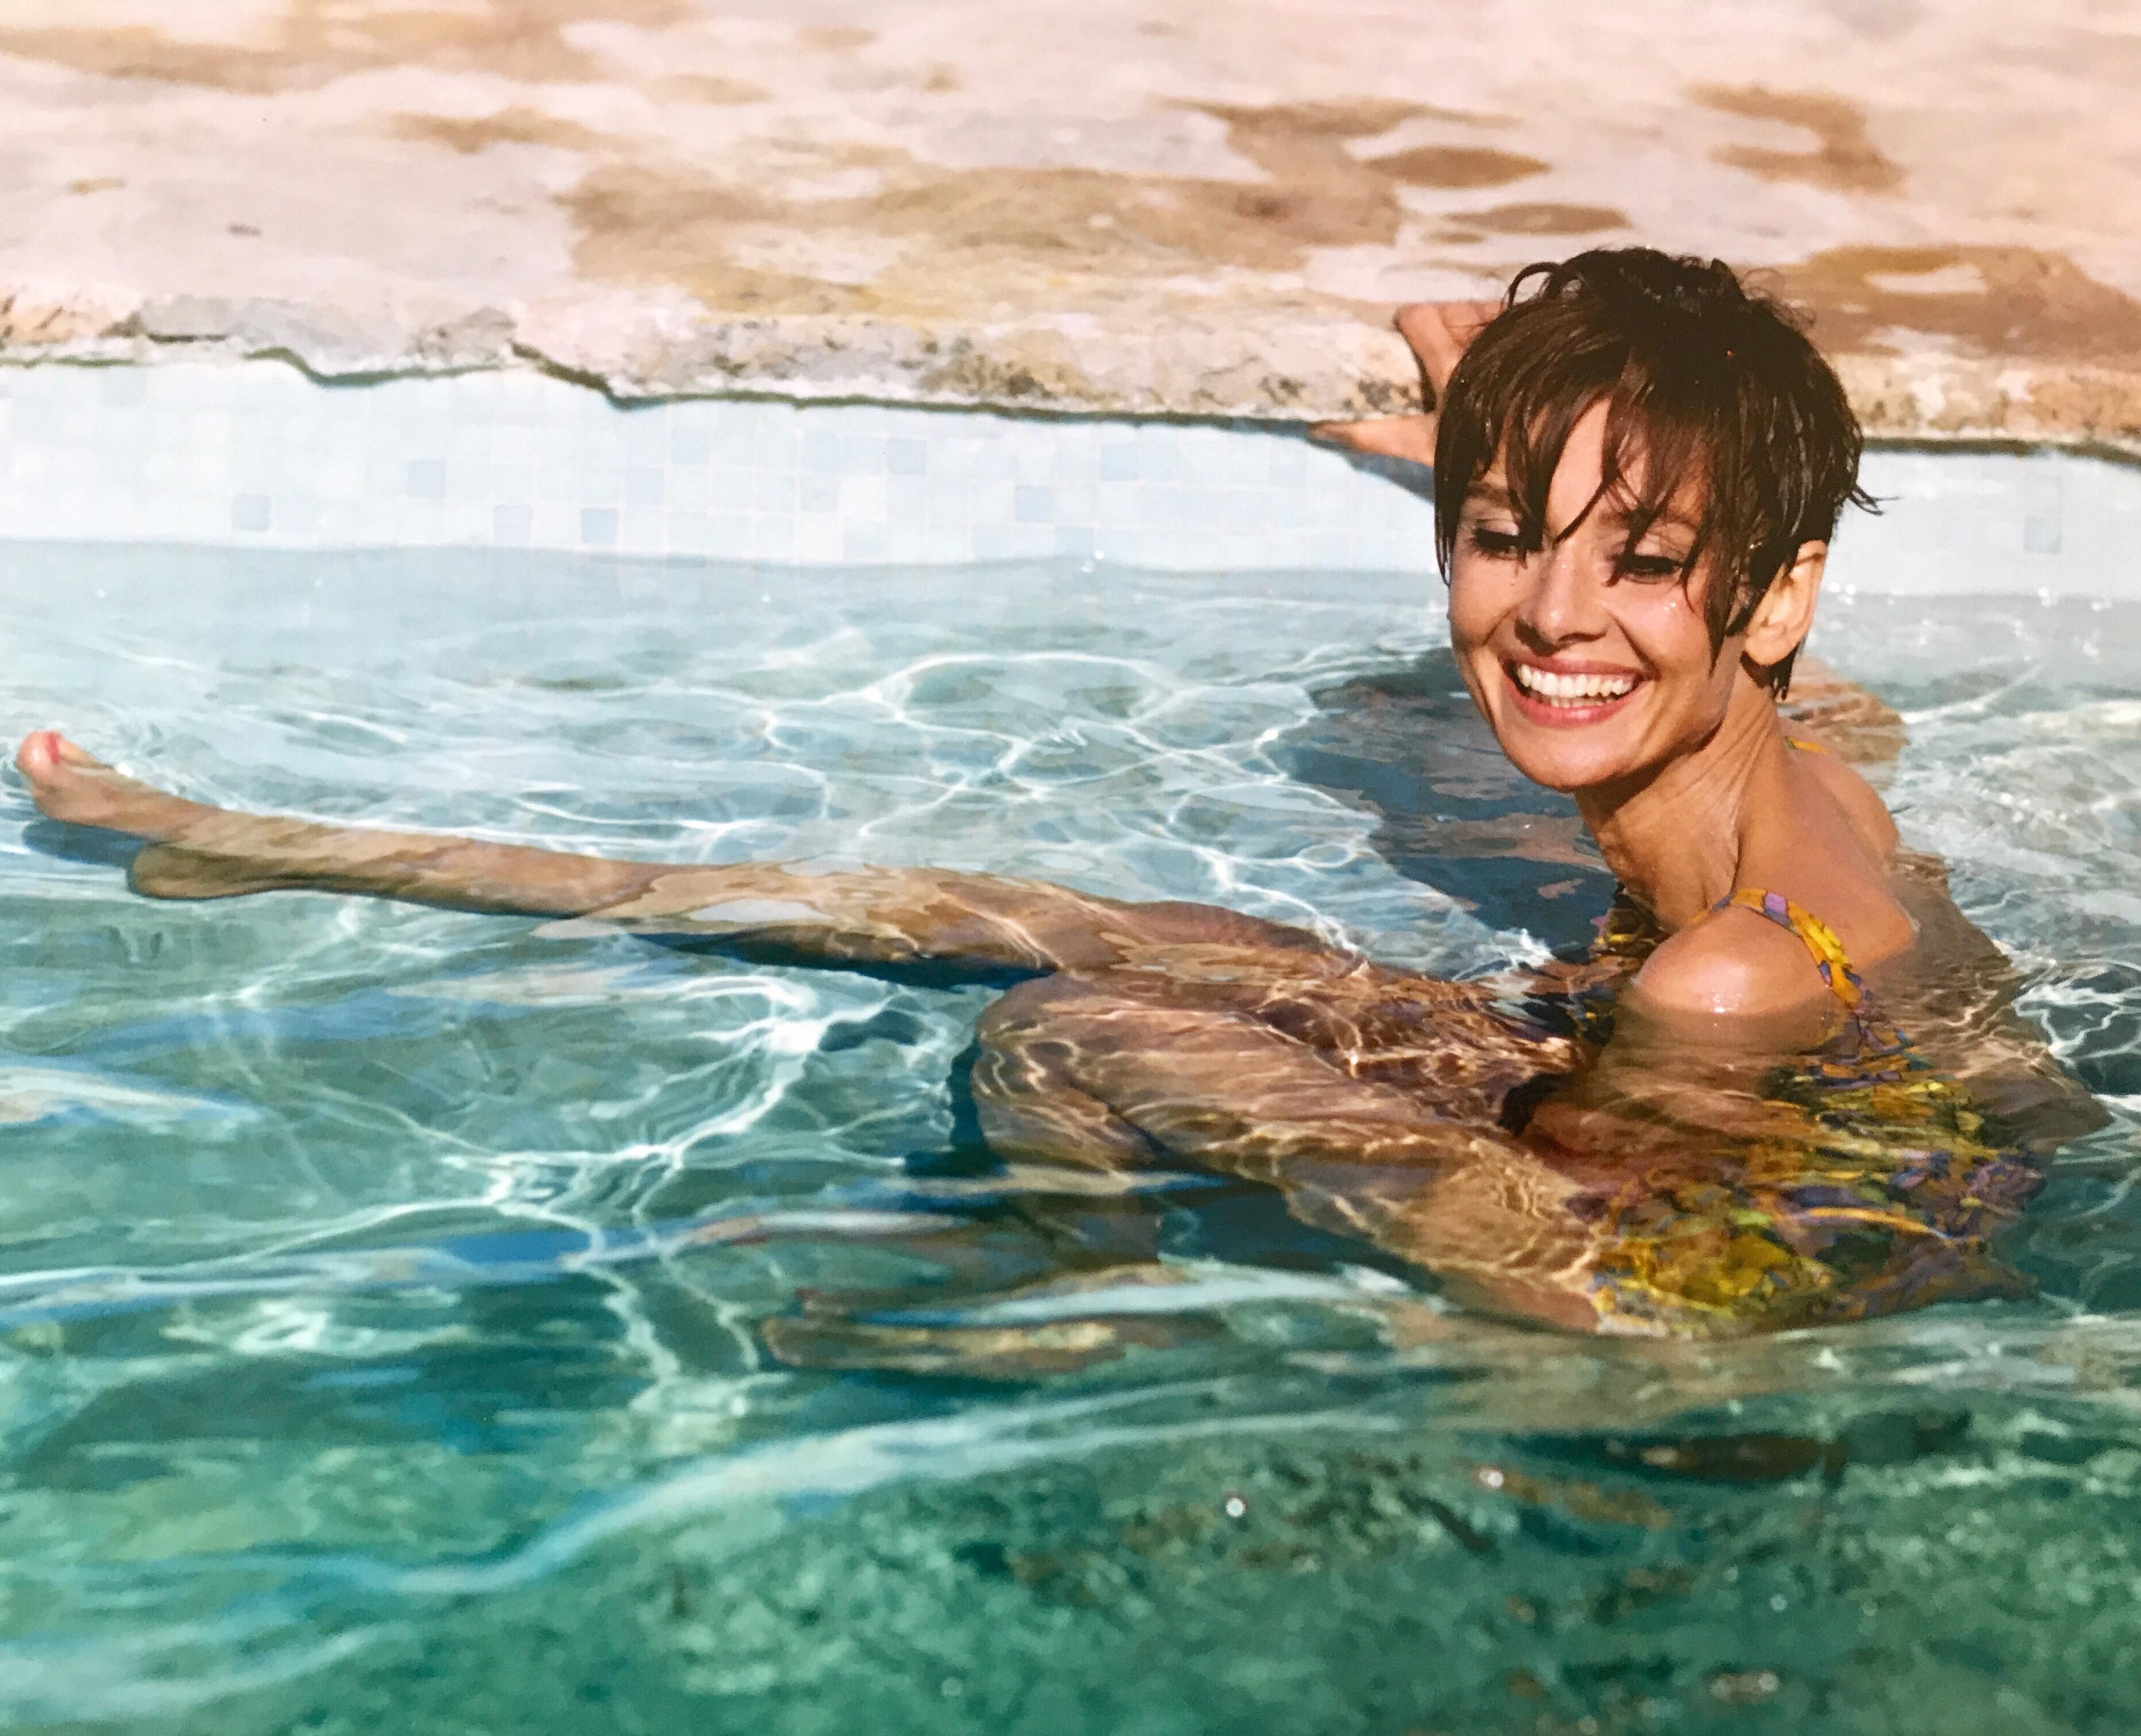 Terry O'Neill Portrait Photograph - ‘ Audrey Hepburn Swims ‘ Terry O’Neill signed limited edition 